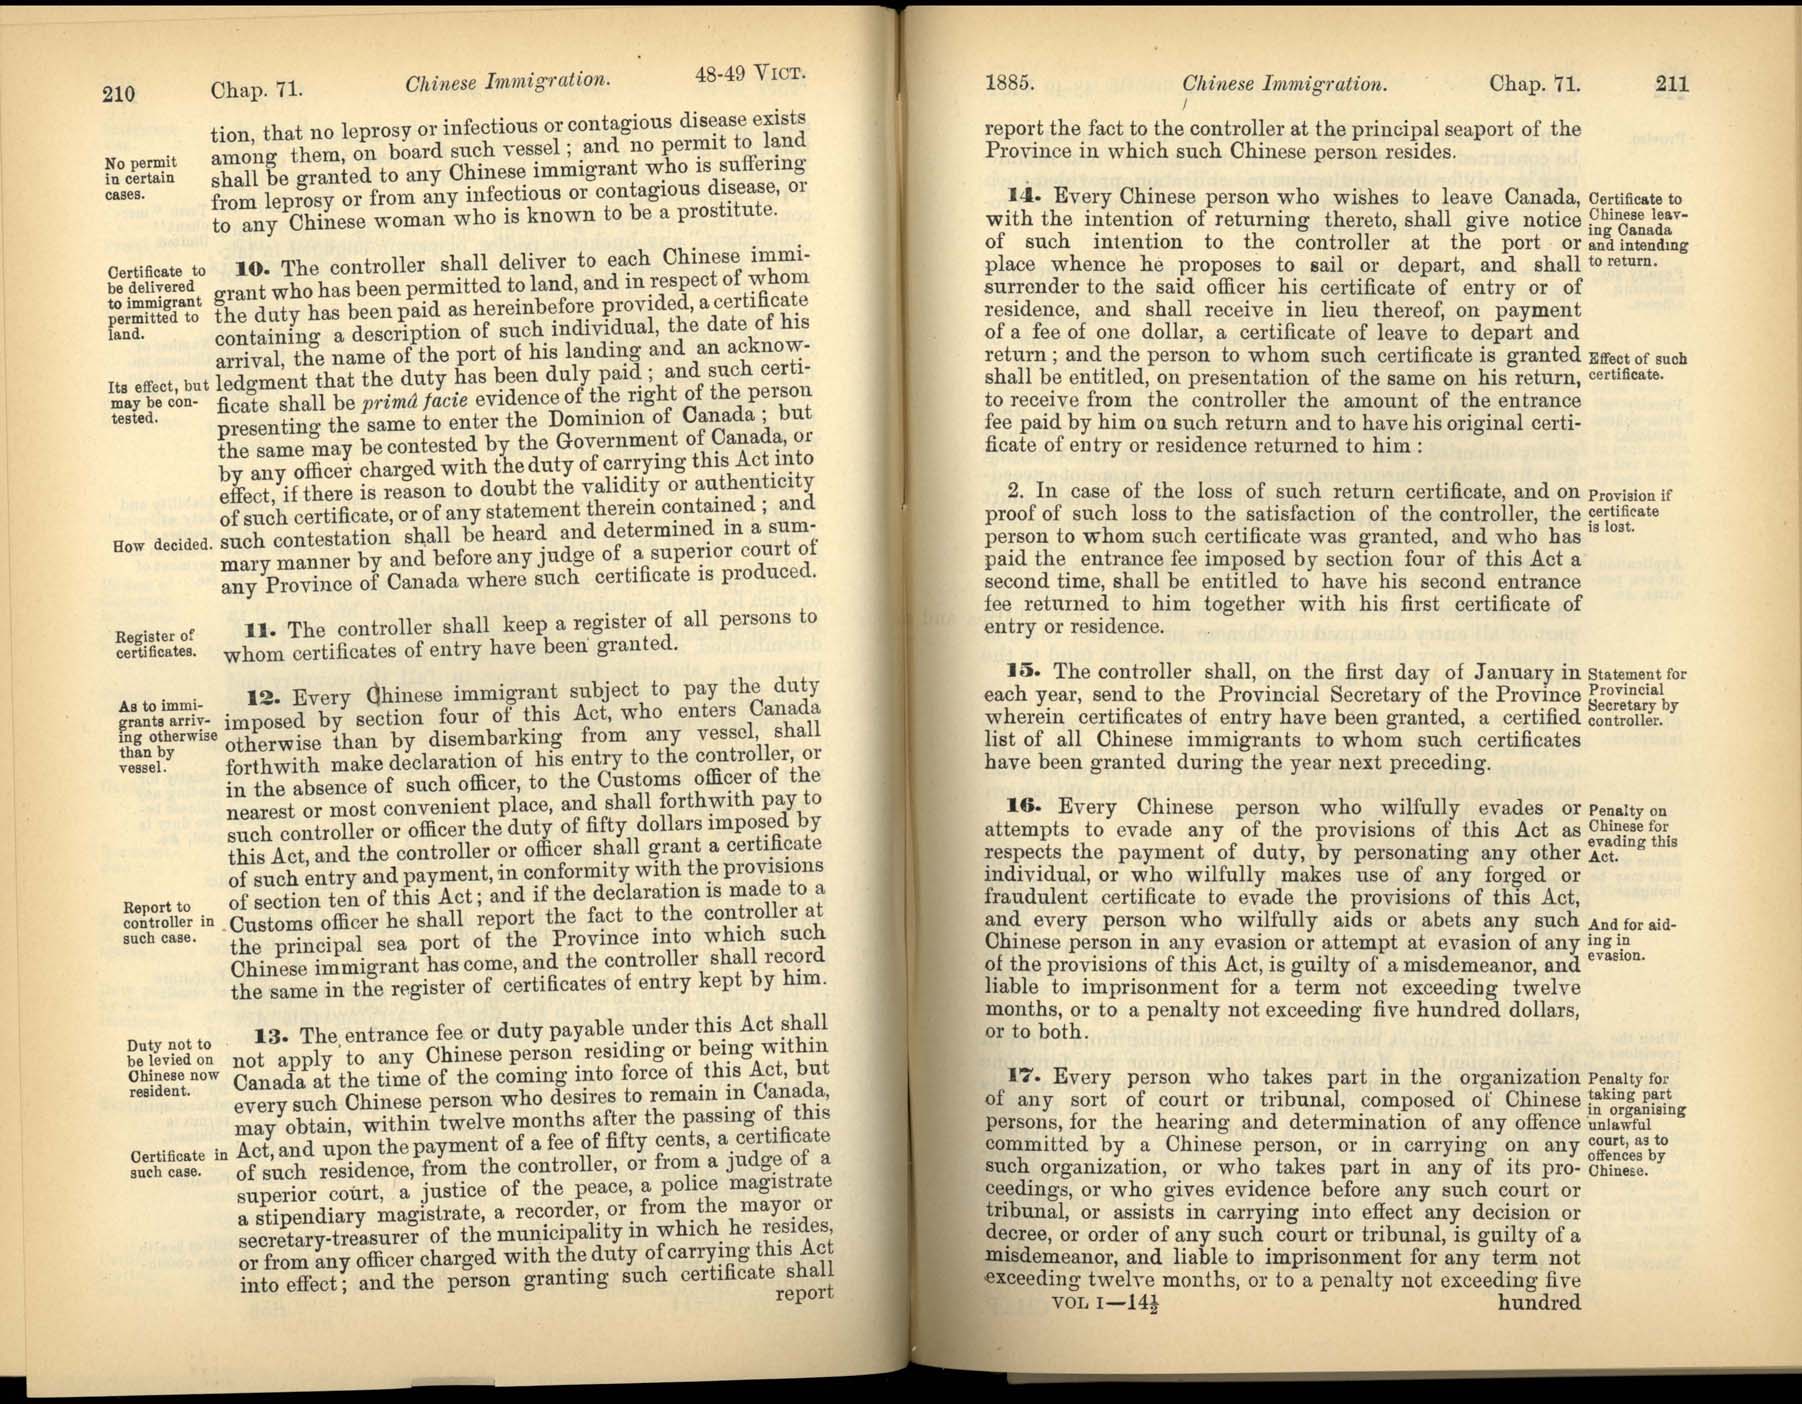 Page 210, 211 The Chinese Immigration Act, 1885